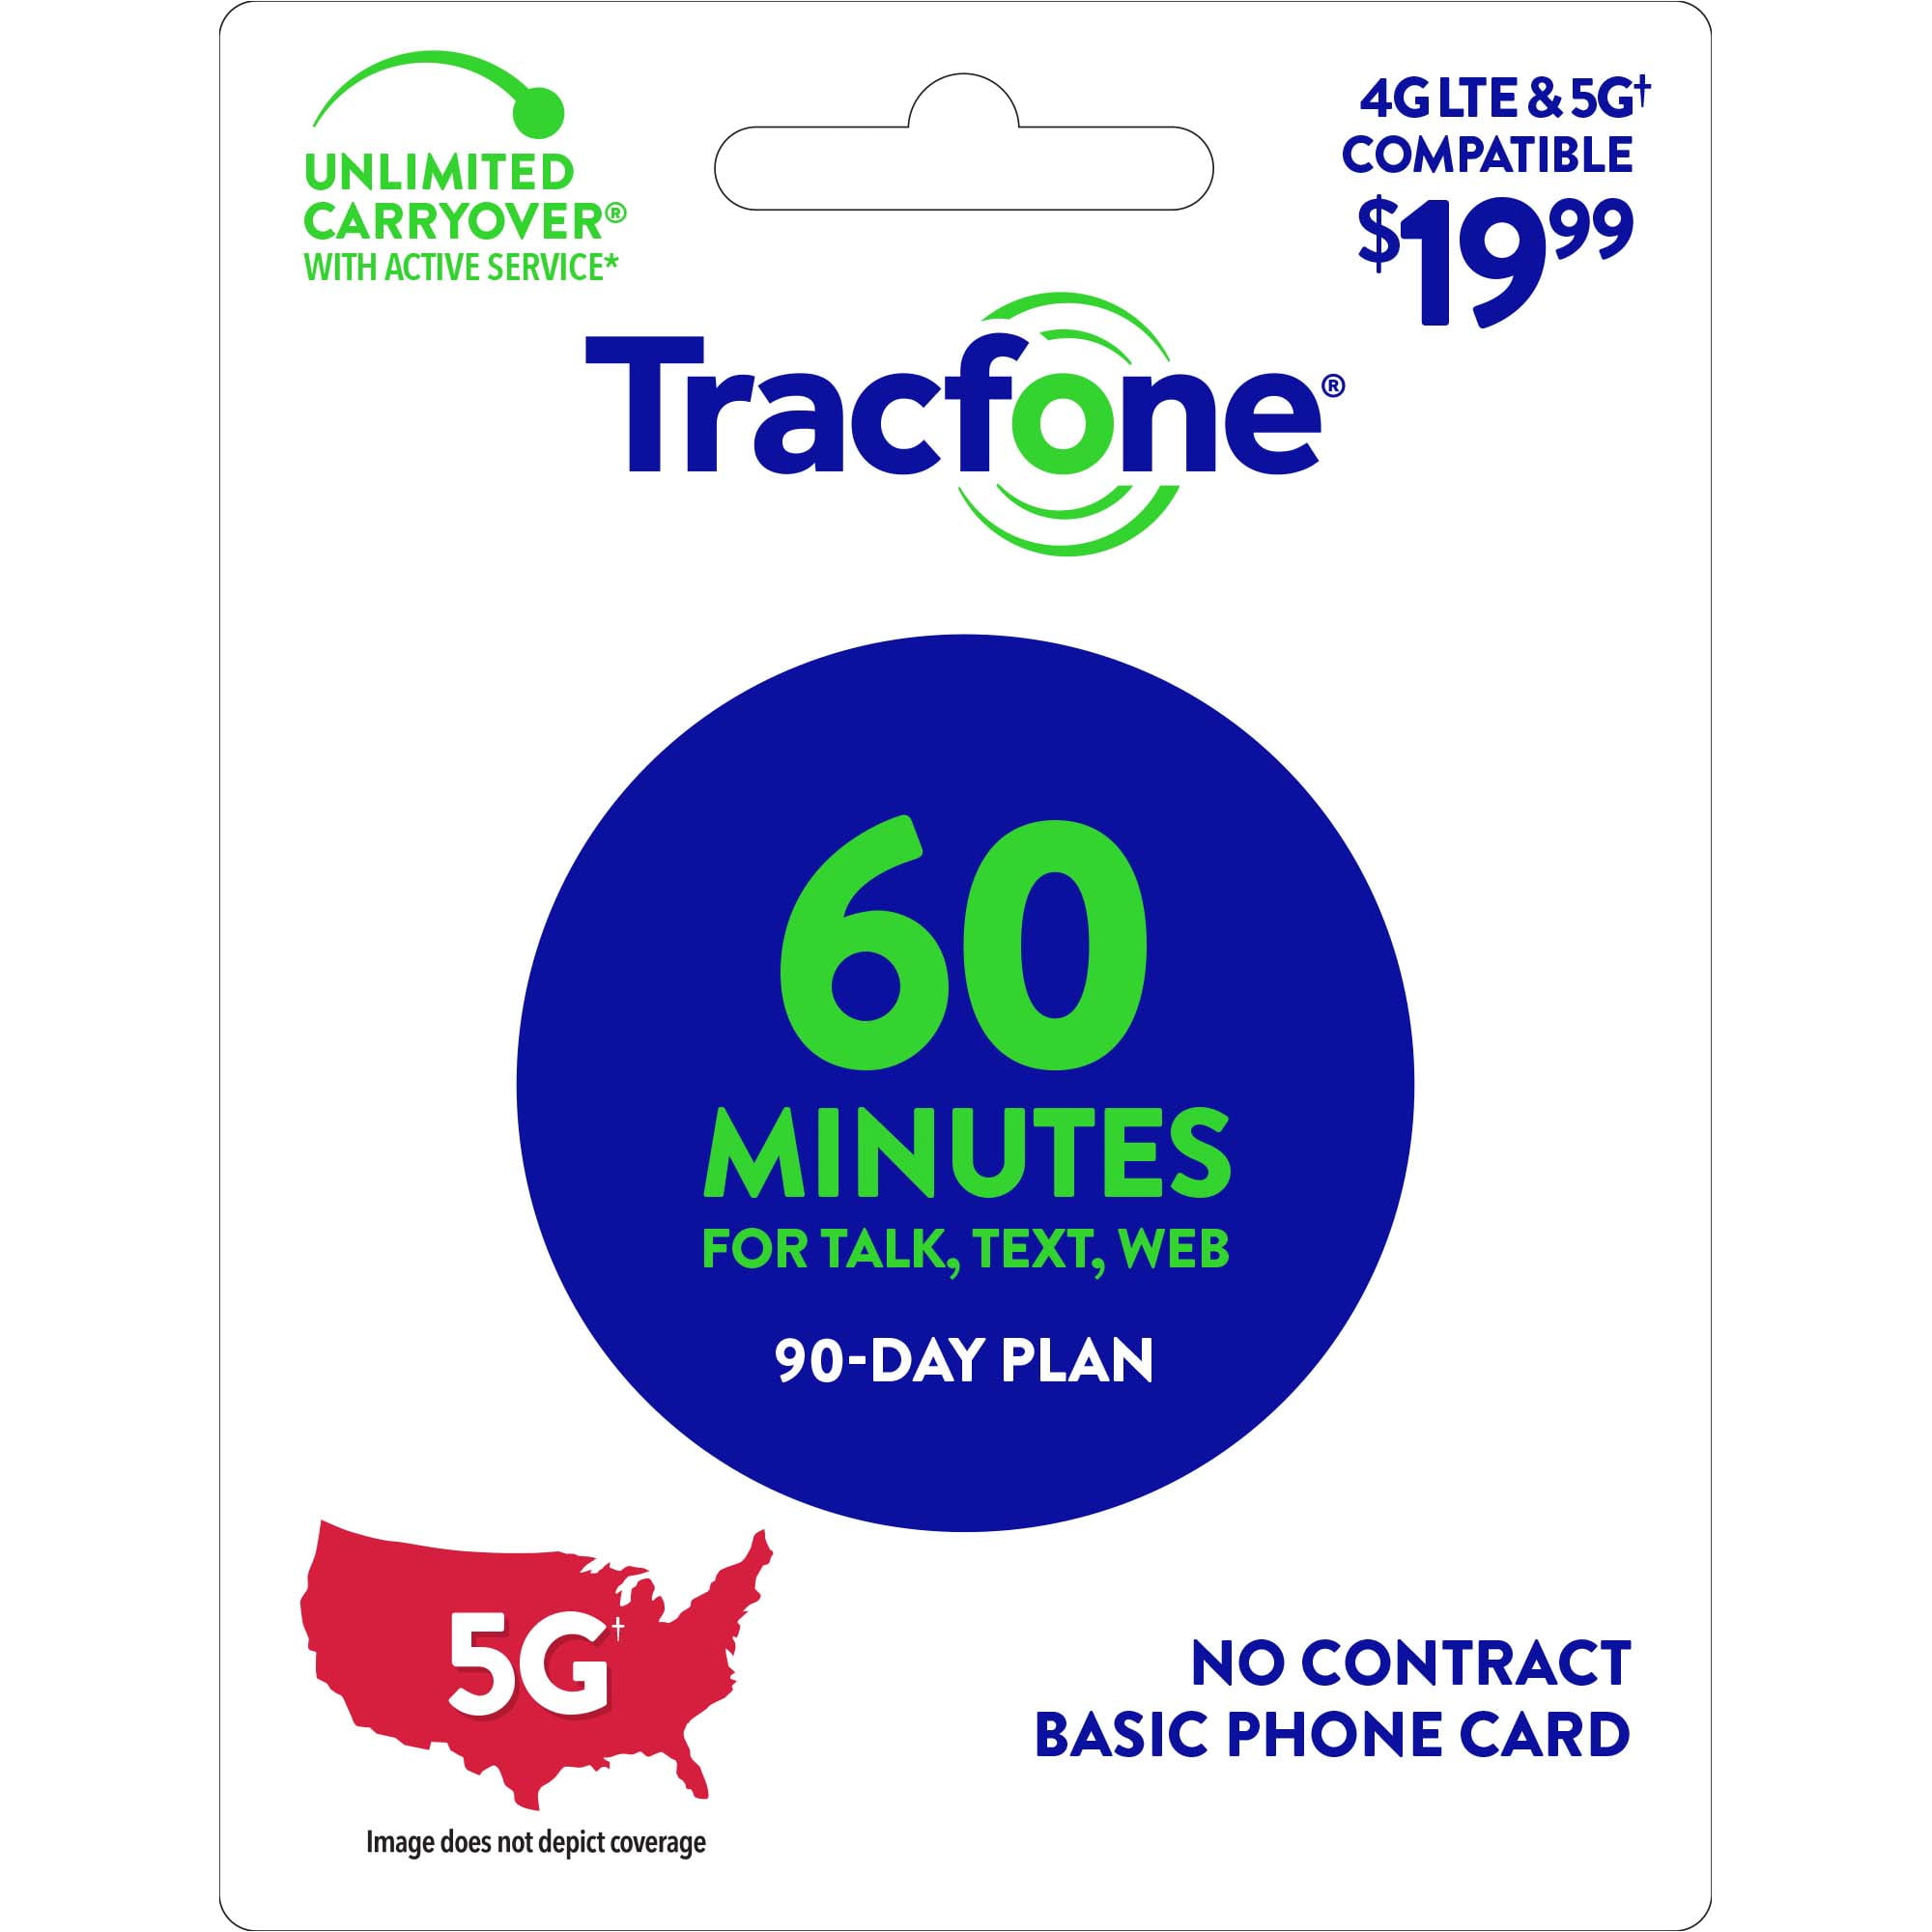 Does Tracfone accept Four financing? — Knoji